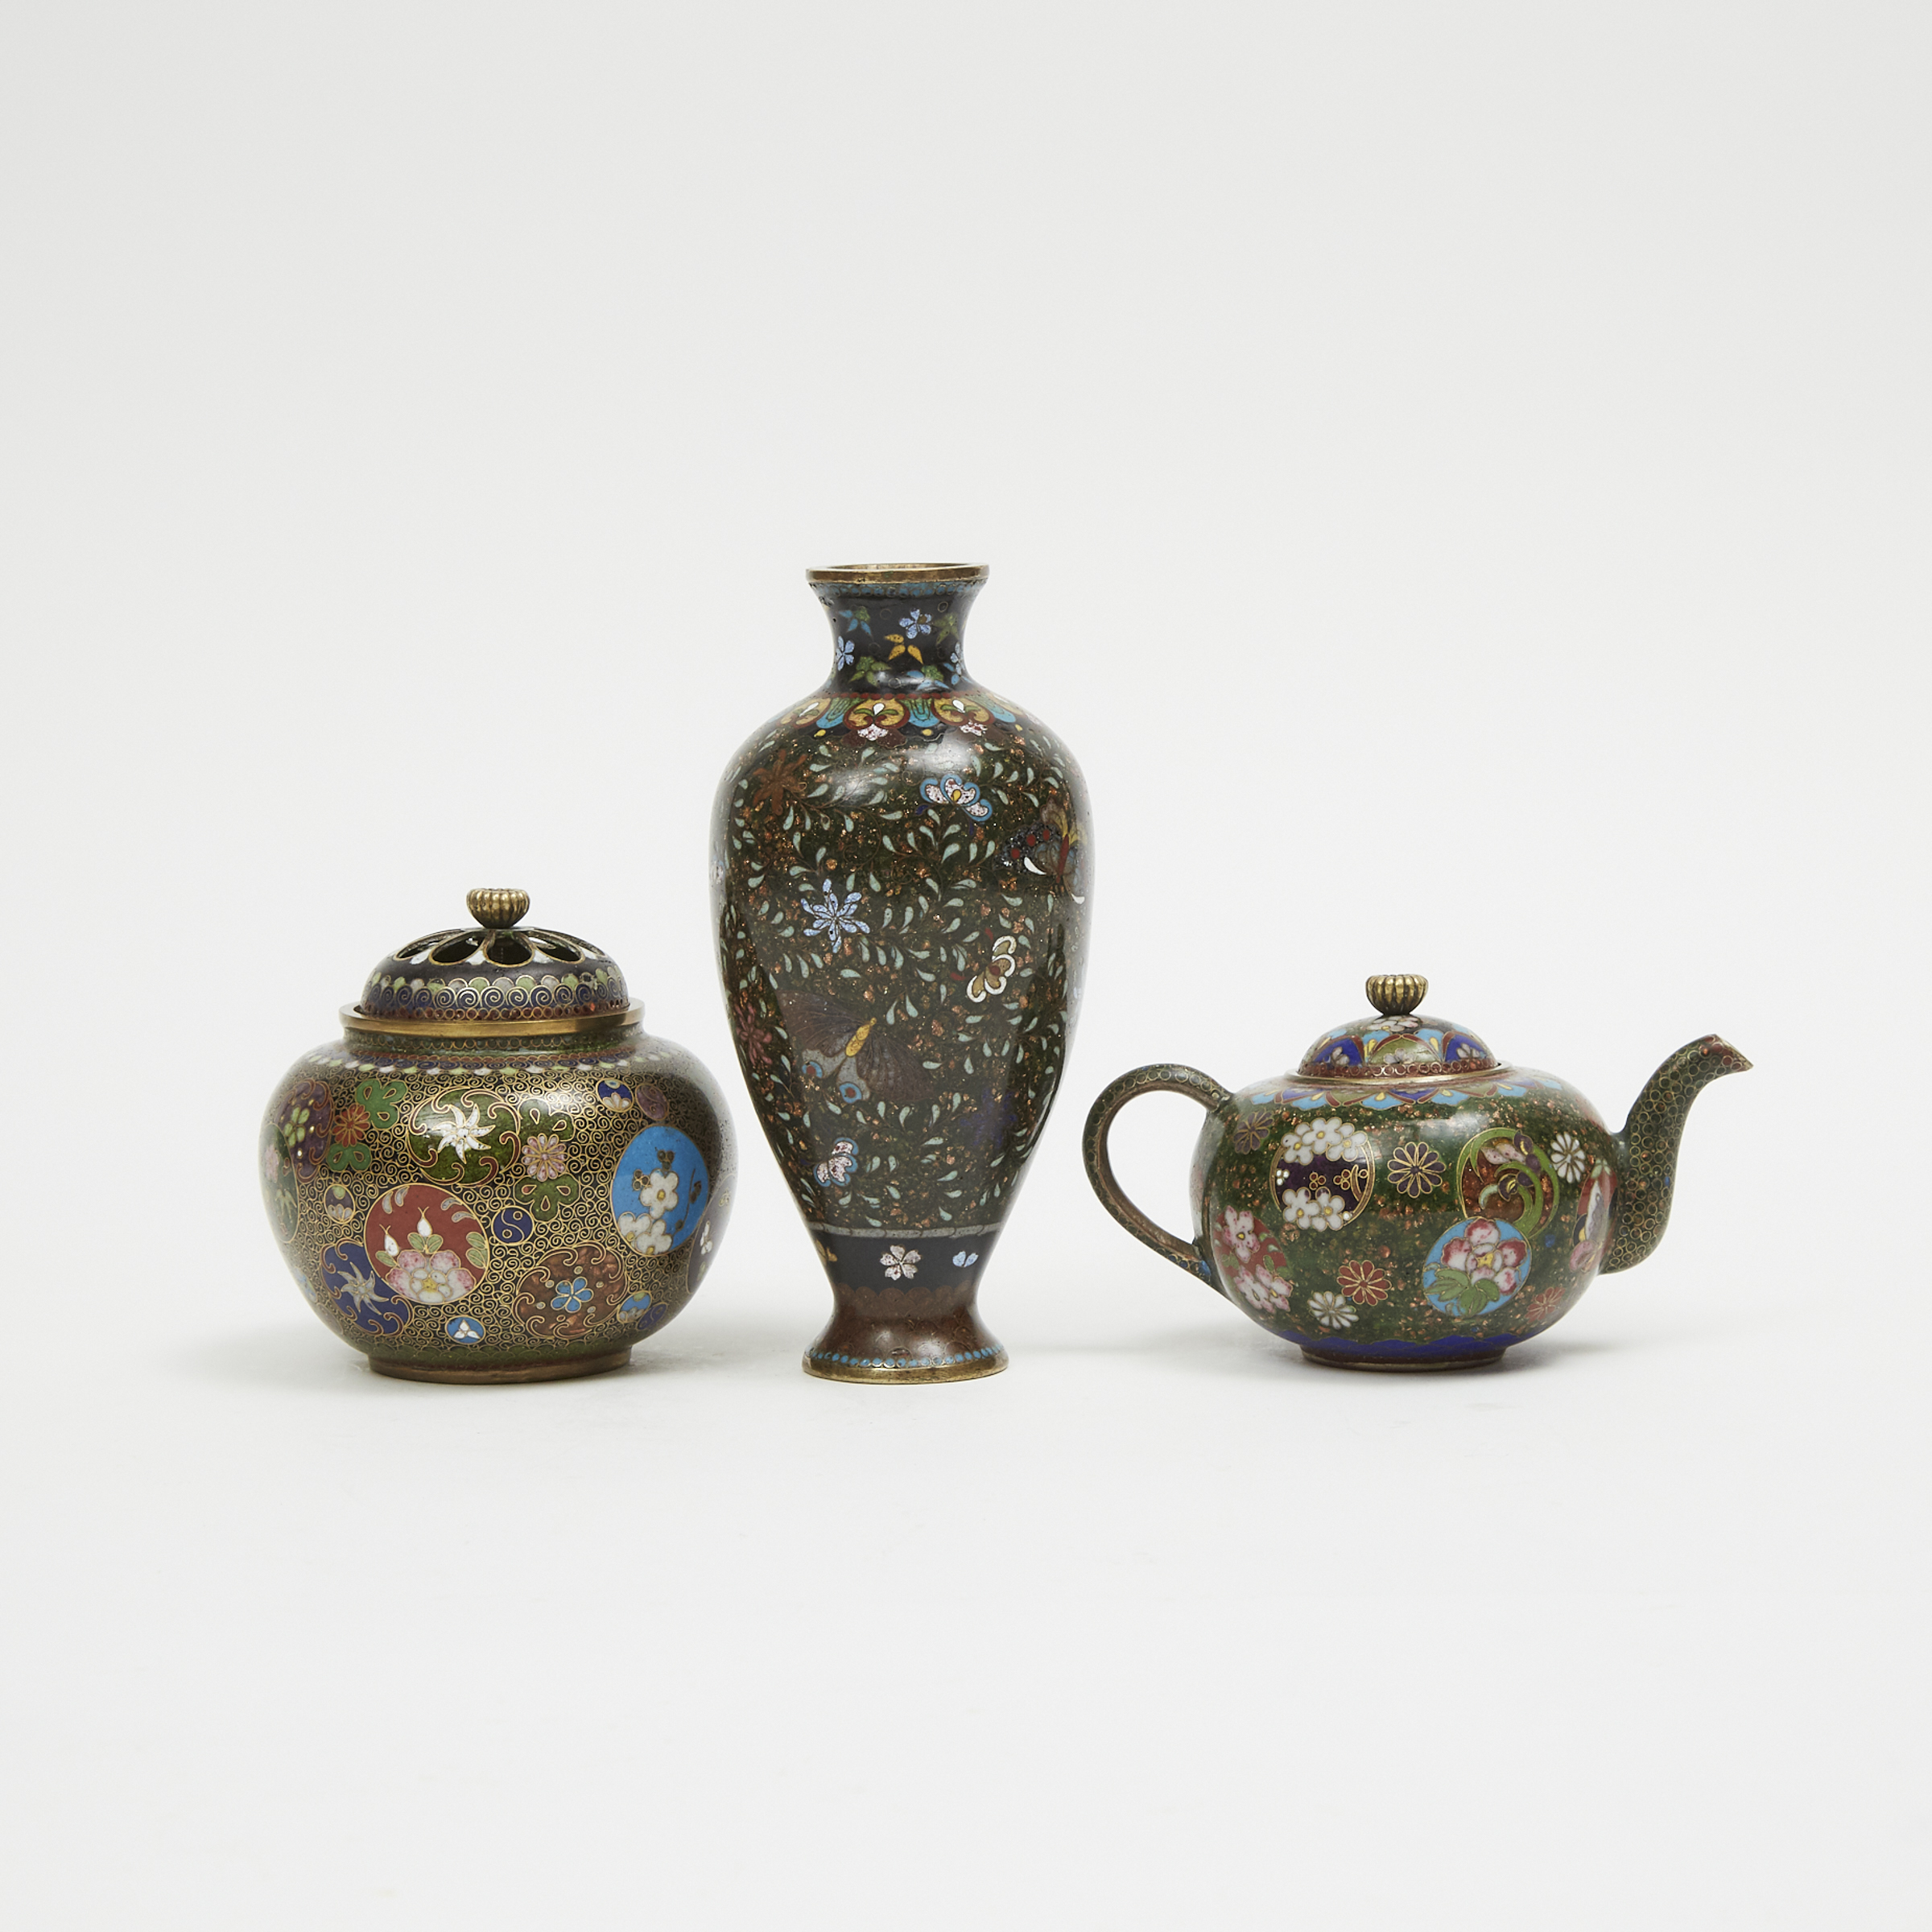 A Group of Three Miniature Cloisonné Wares